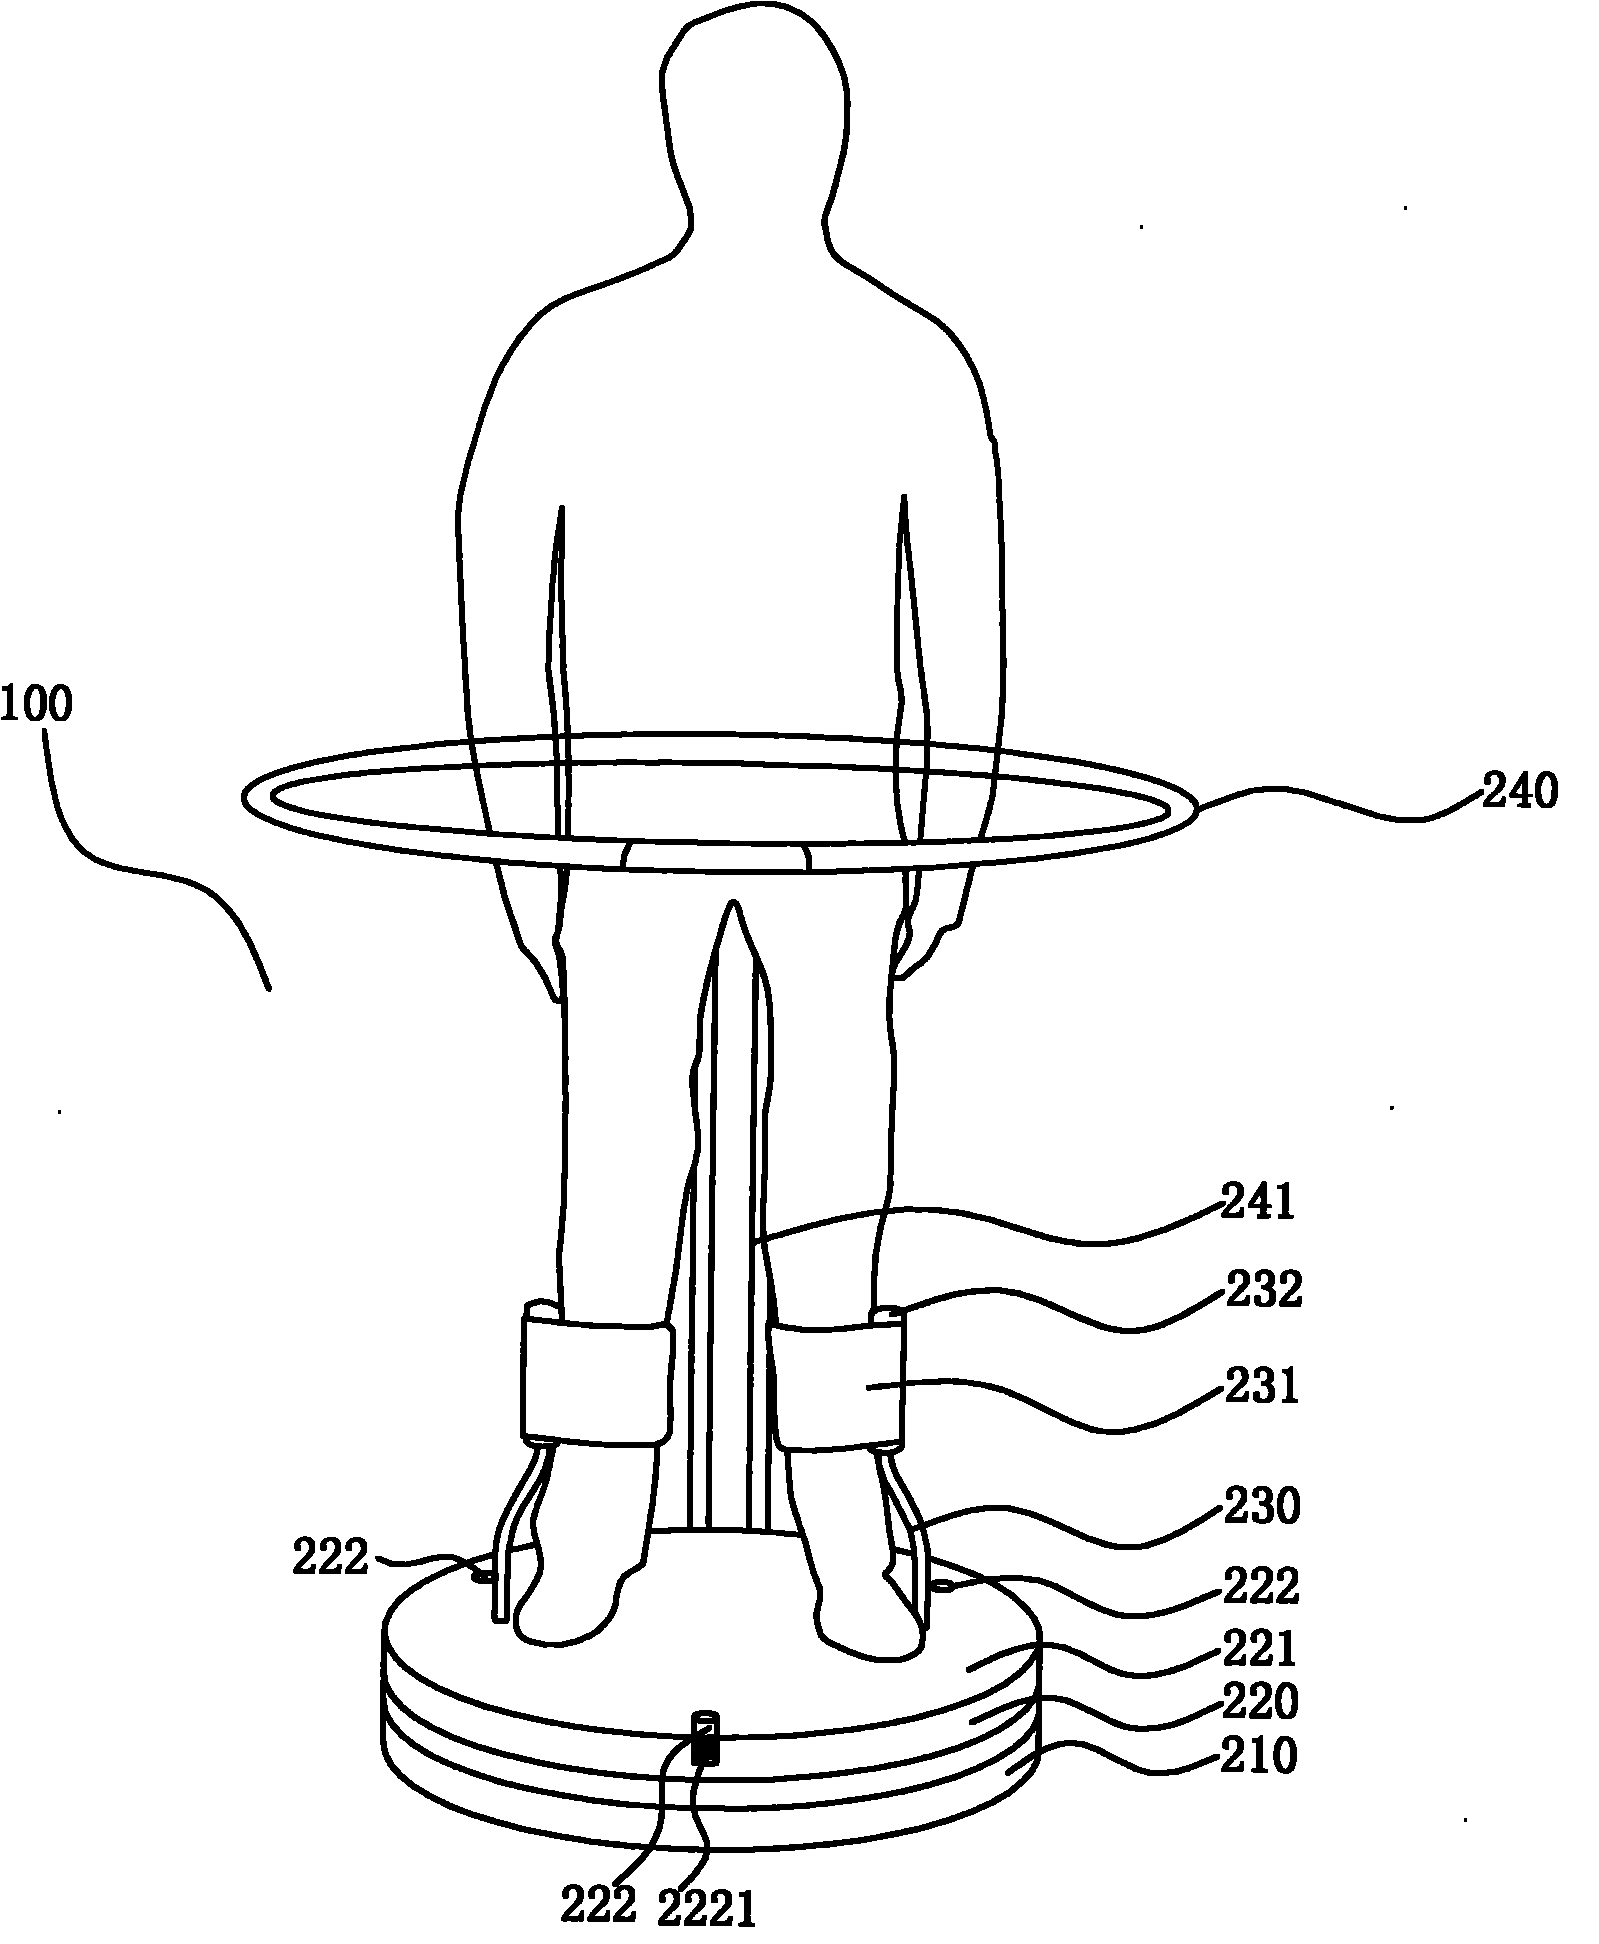 Incline body building device